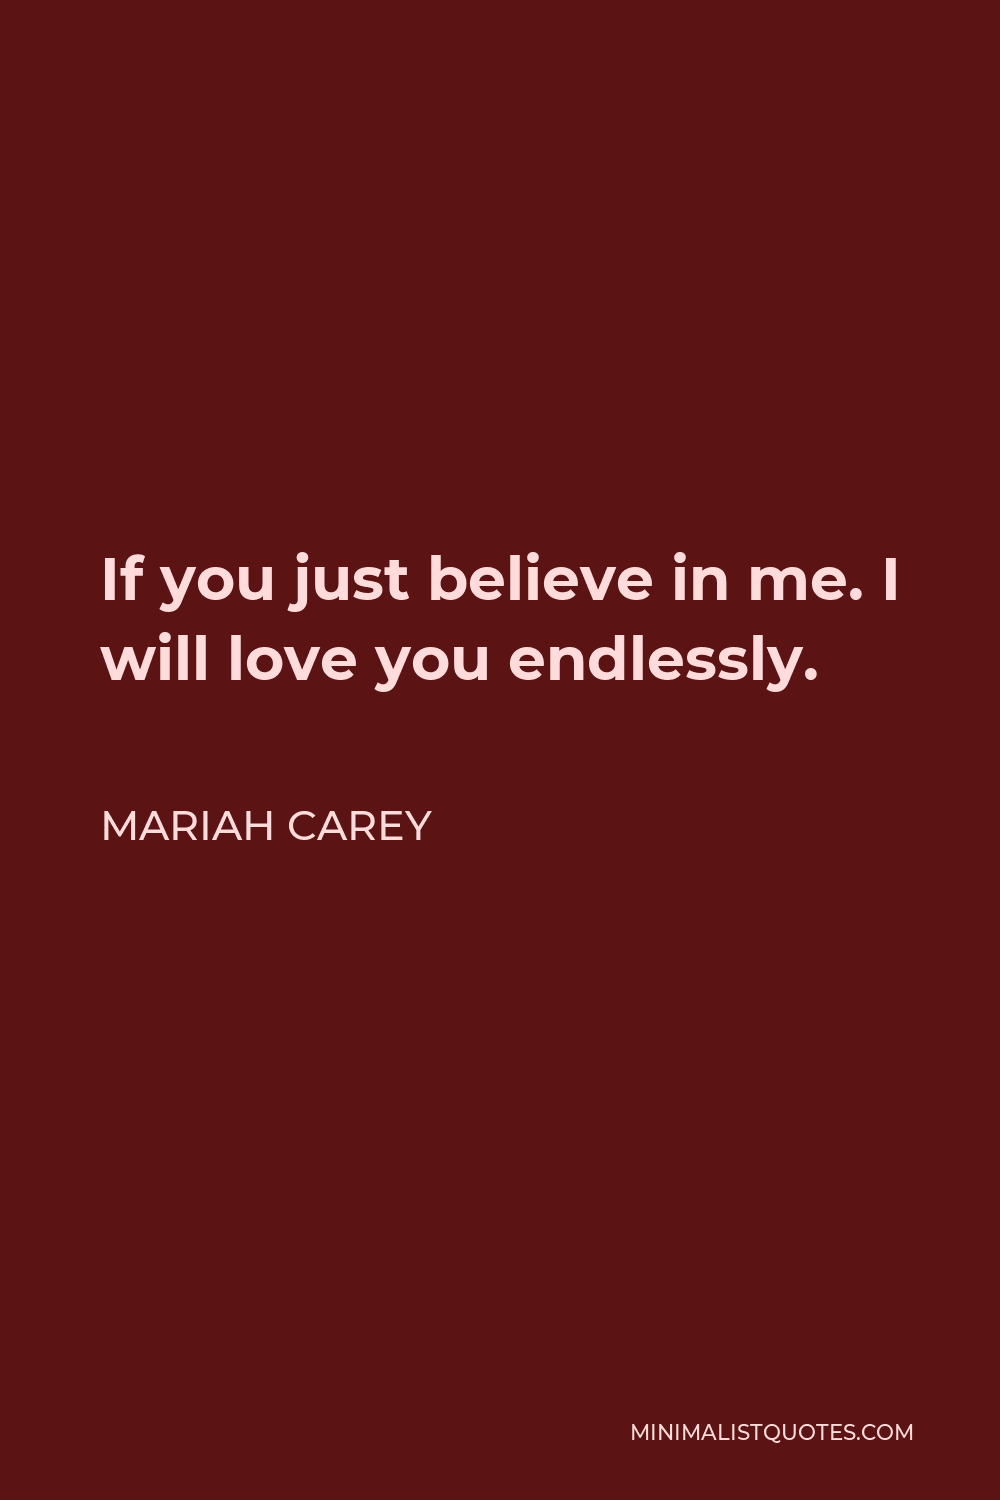 Mariah Carey Quote - If you just believe in me. I will love you endlessly.